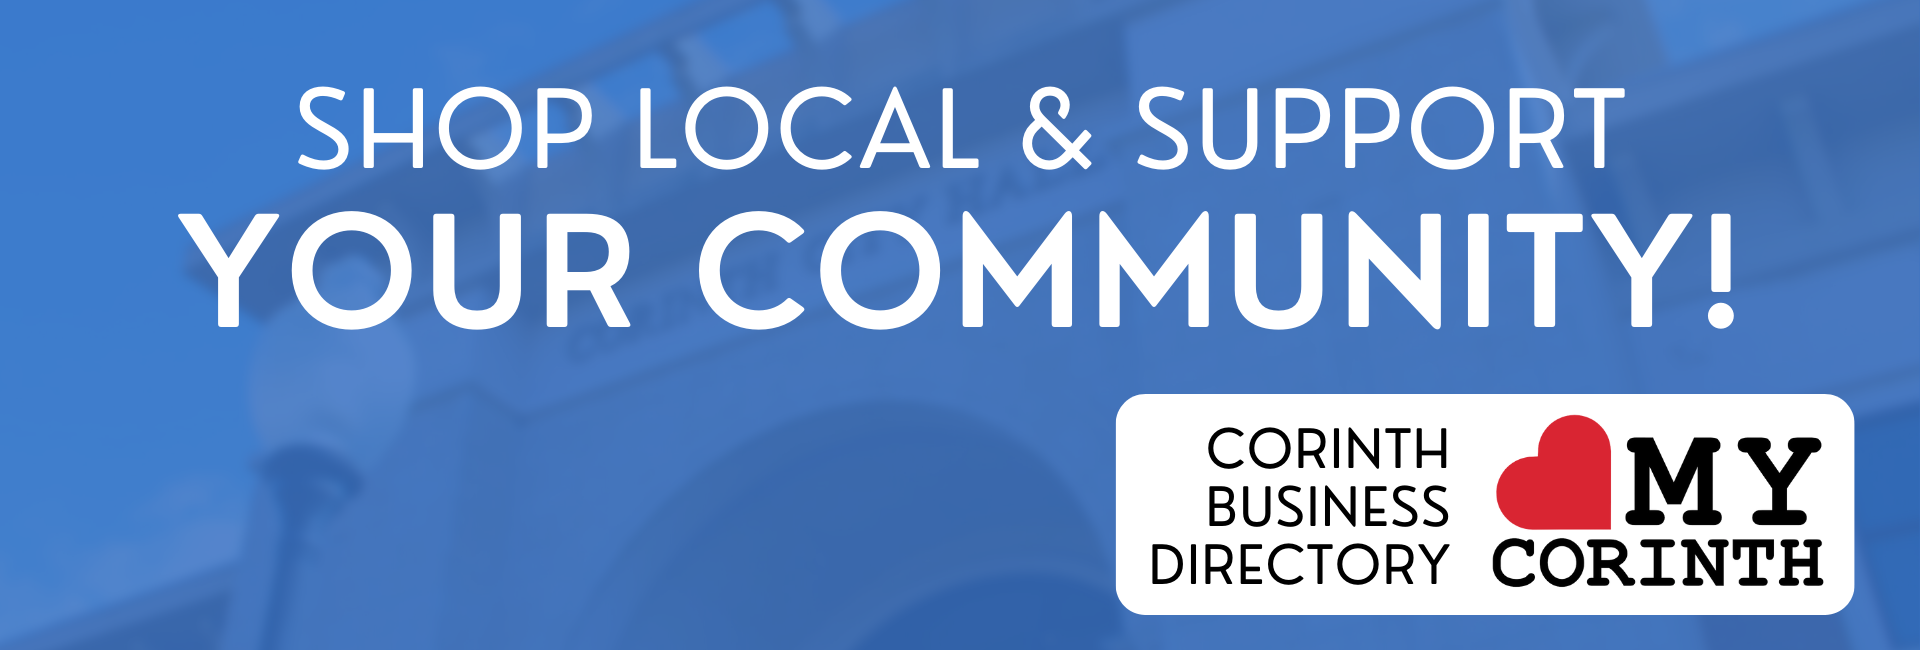 CORINTH BUSINESS DIRECTORY